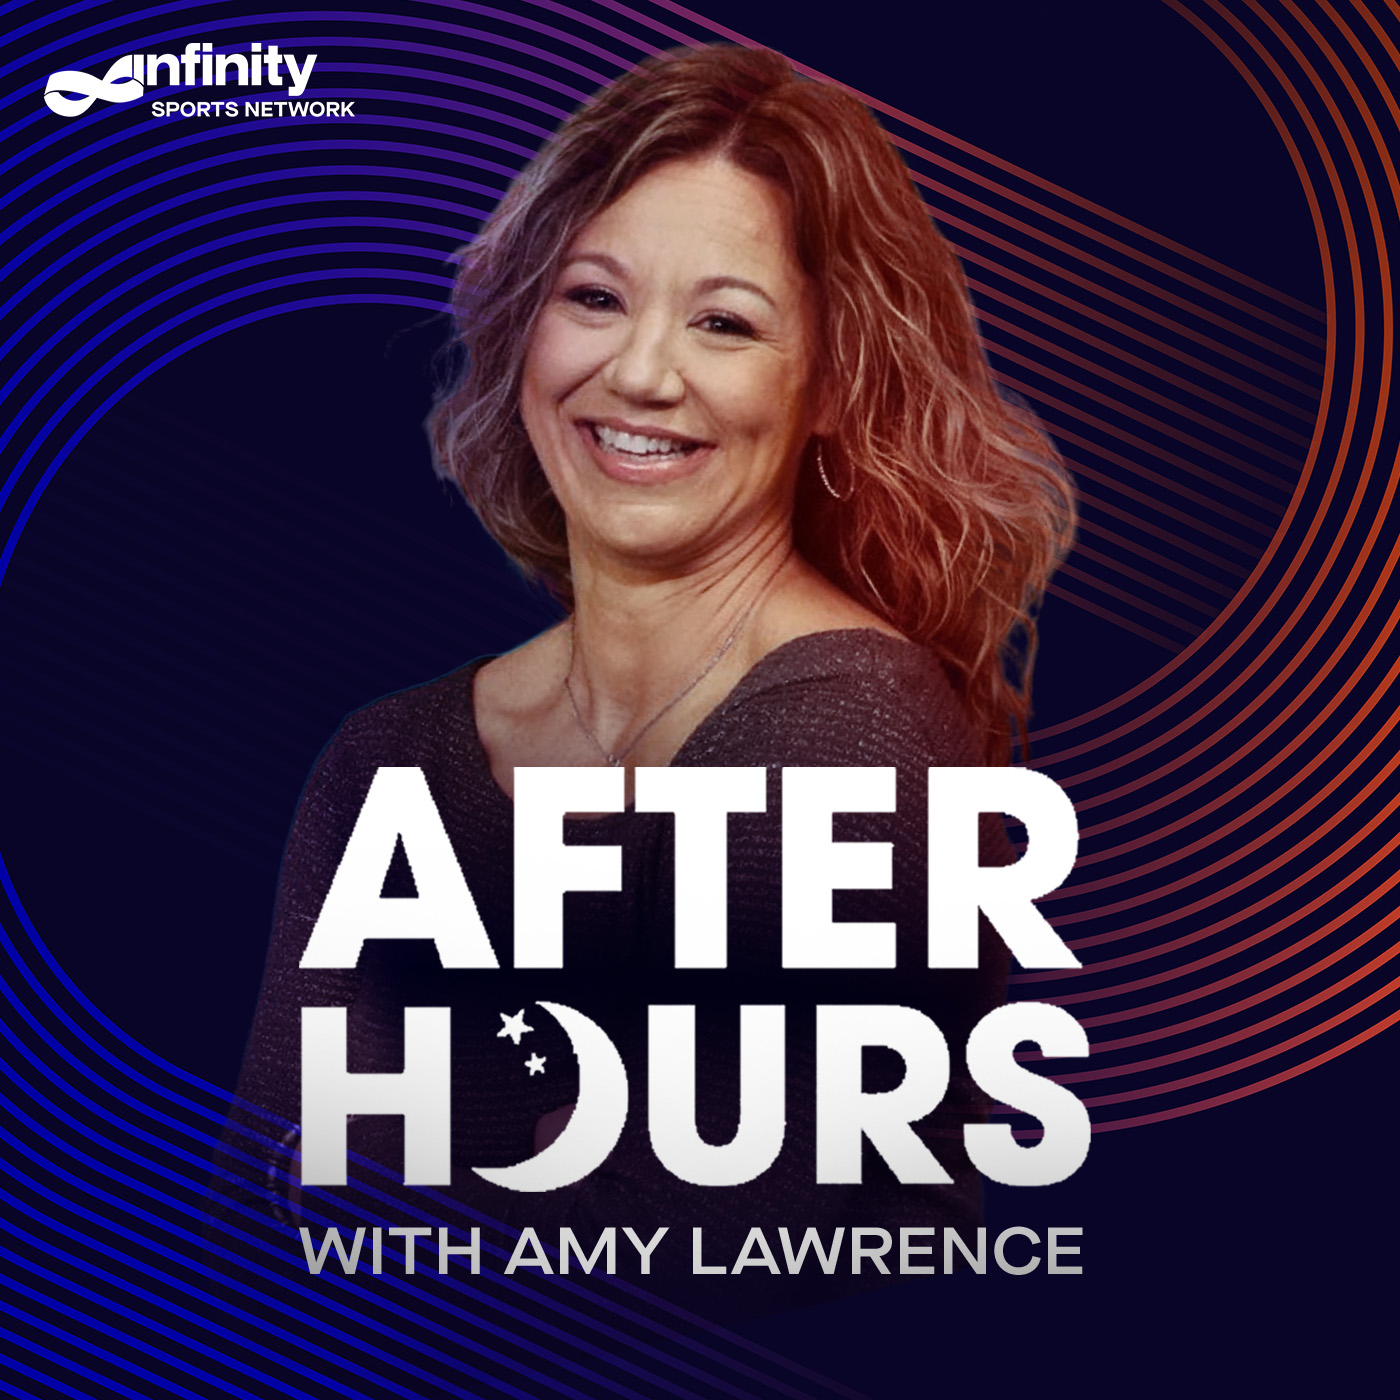 2-18-22 After Hours with Amy Lawrence PODCAST: Hour 3